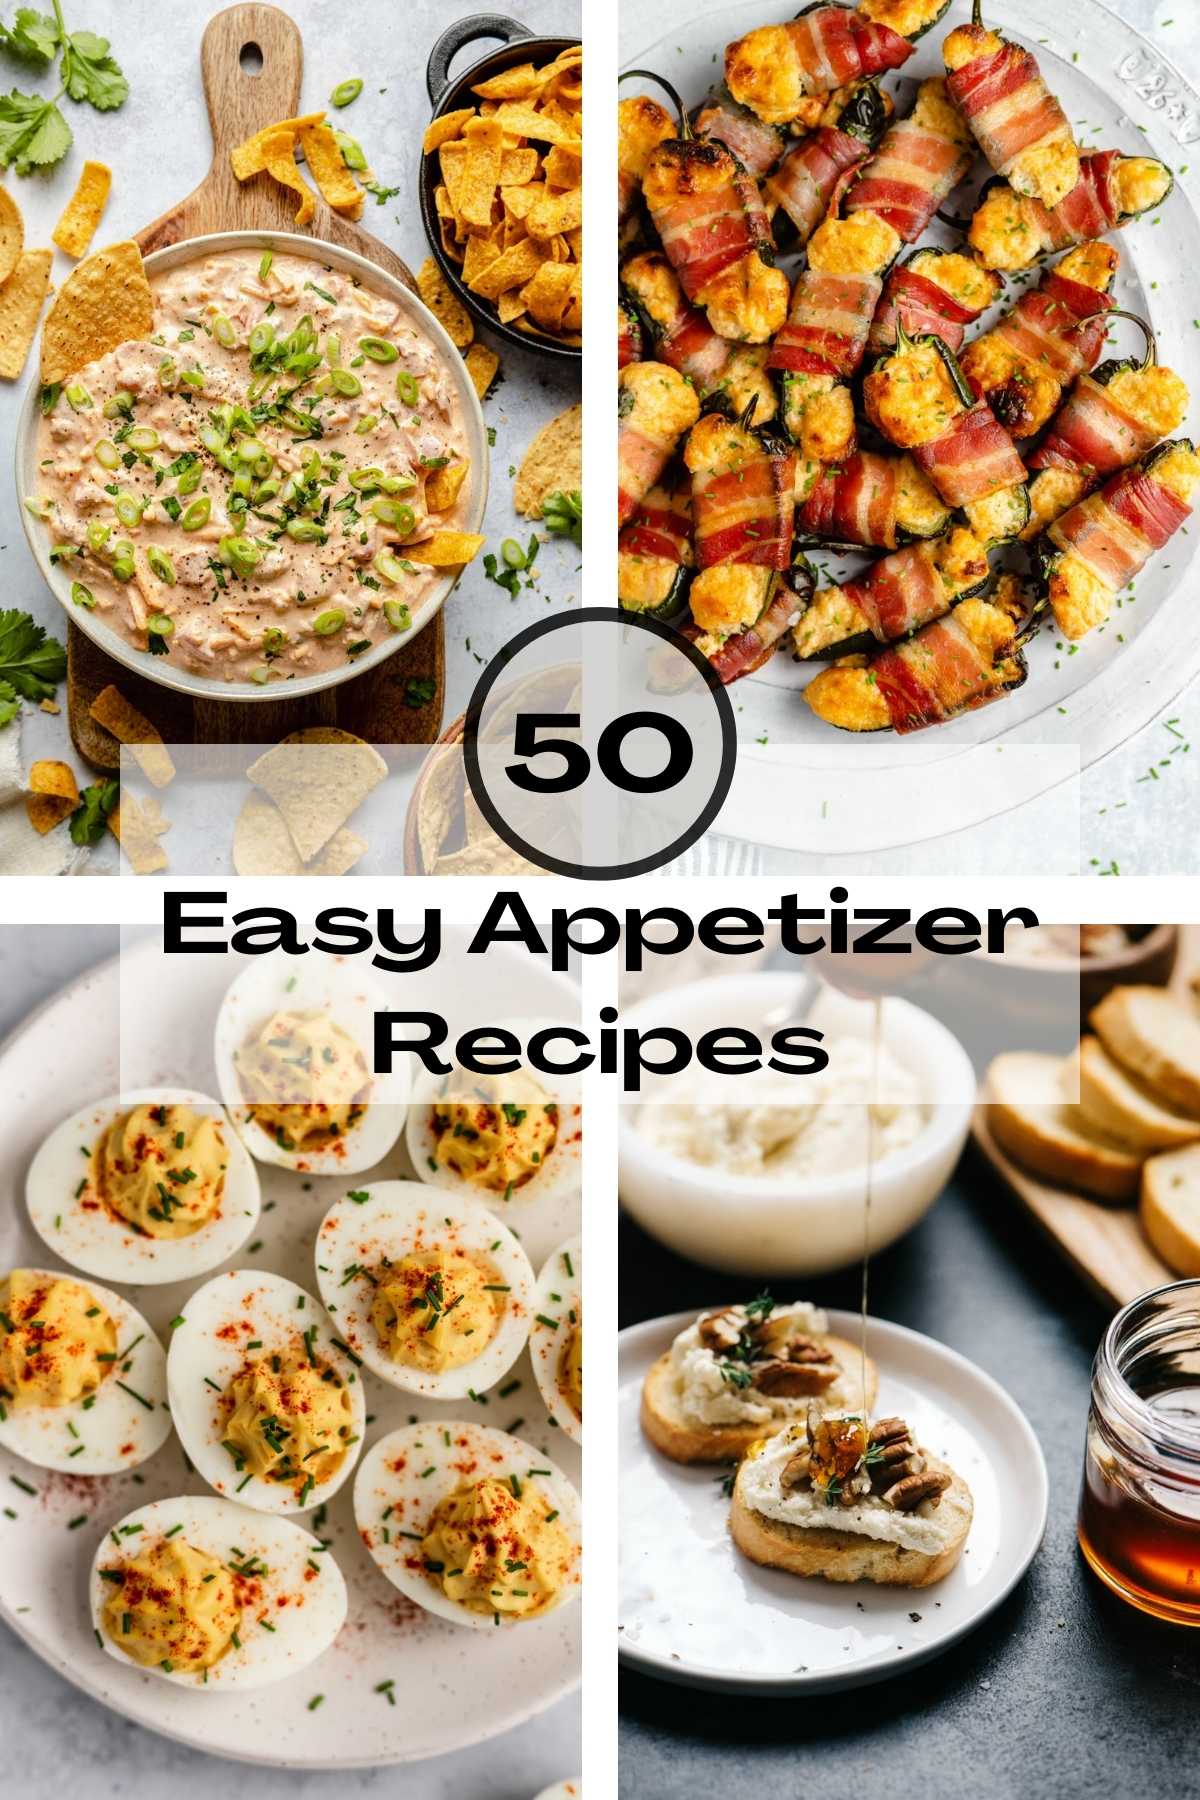 Easy appetizer ideas showing dip, poppers, deviled eggs and crostini.